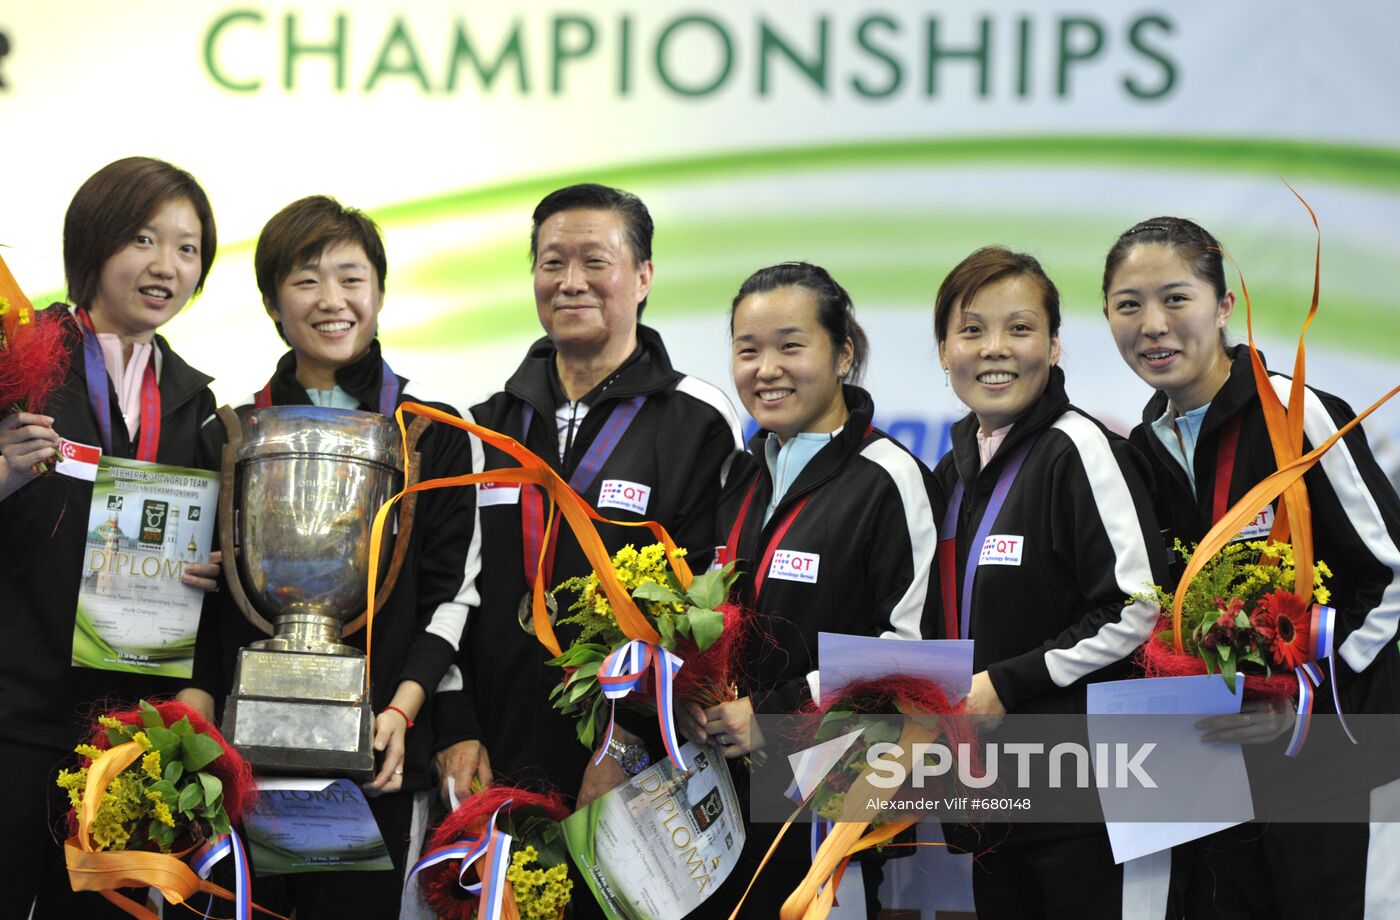 Singapore's female team becomes world ping-pong champion